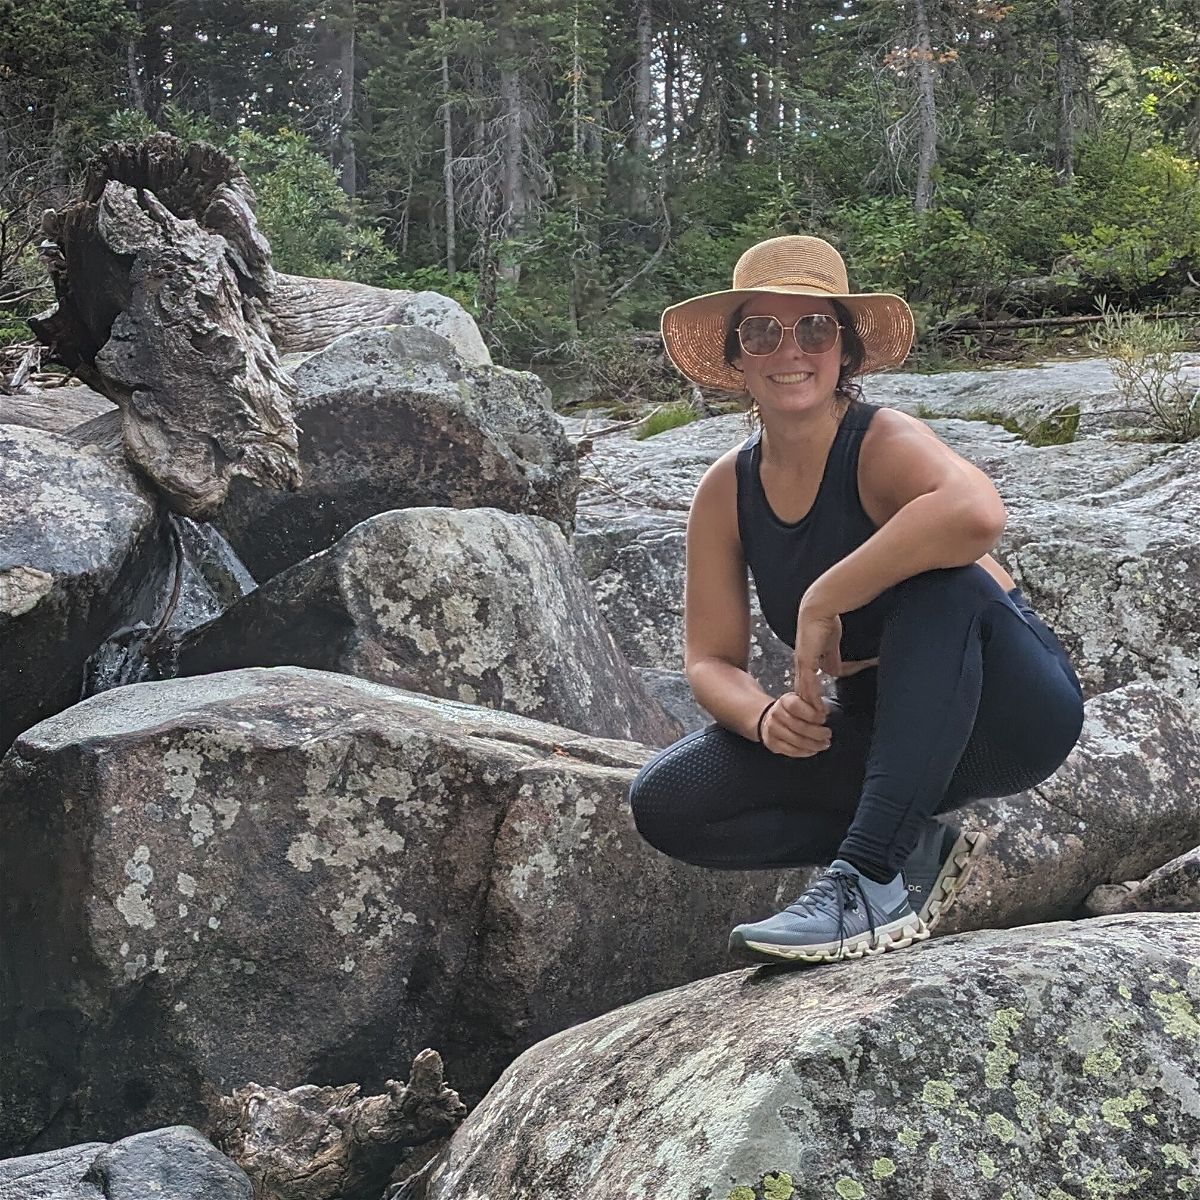 Jodelle posing in a sun hat on boulders during a hike.